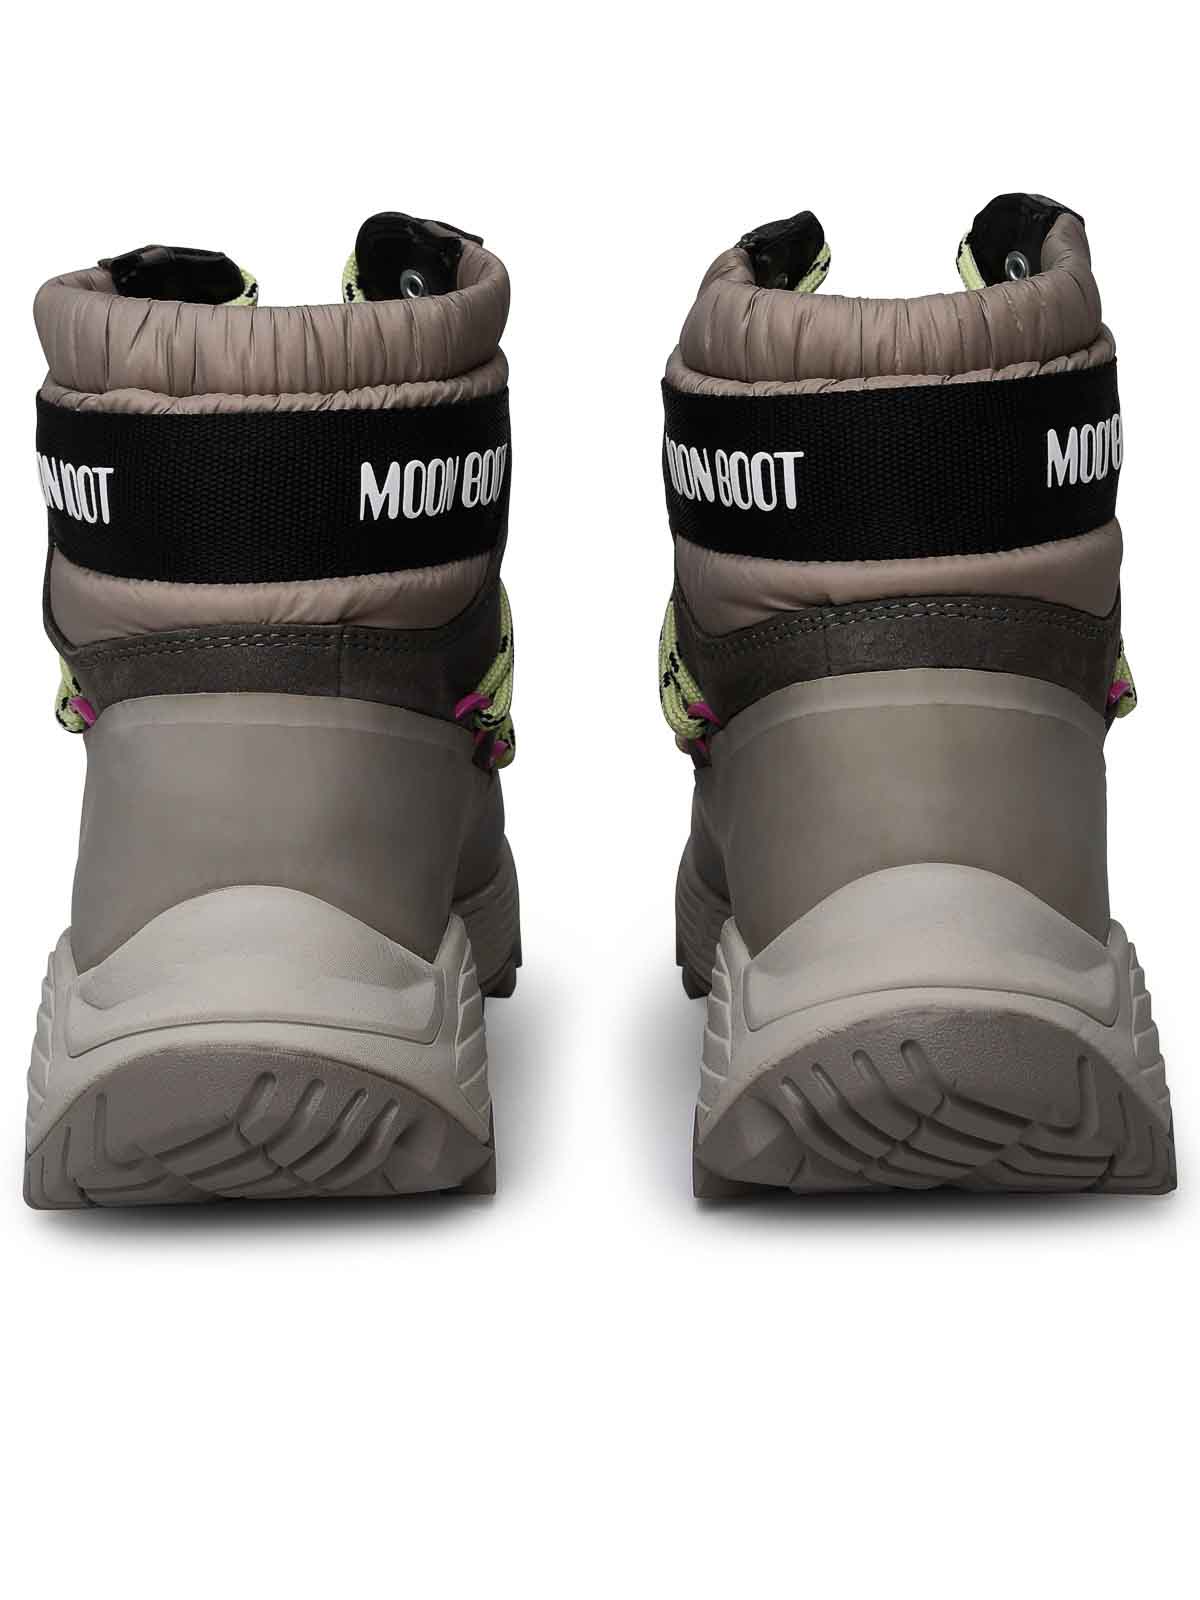 Moon Boot shoes online